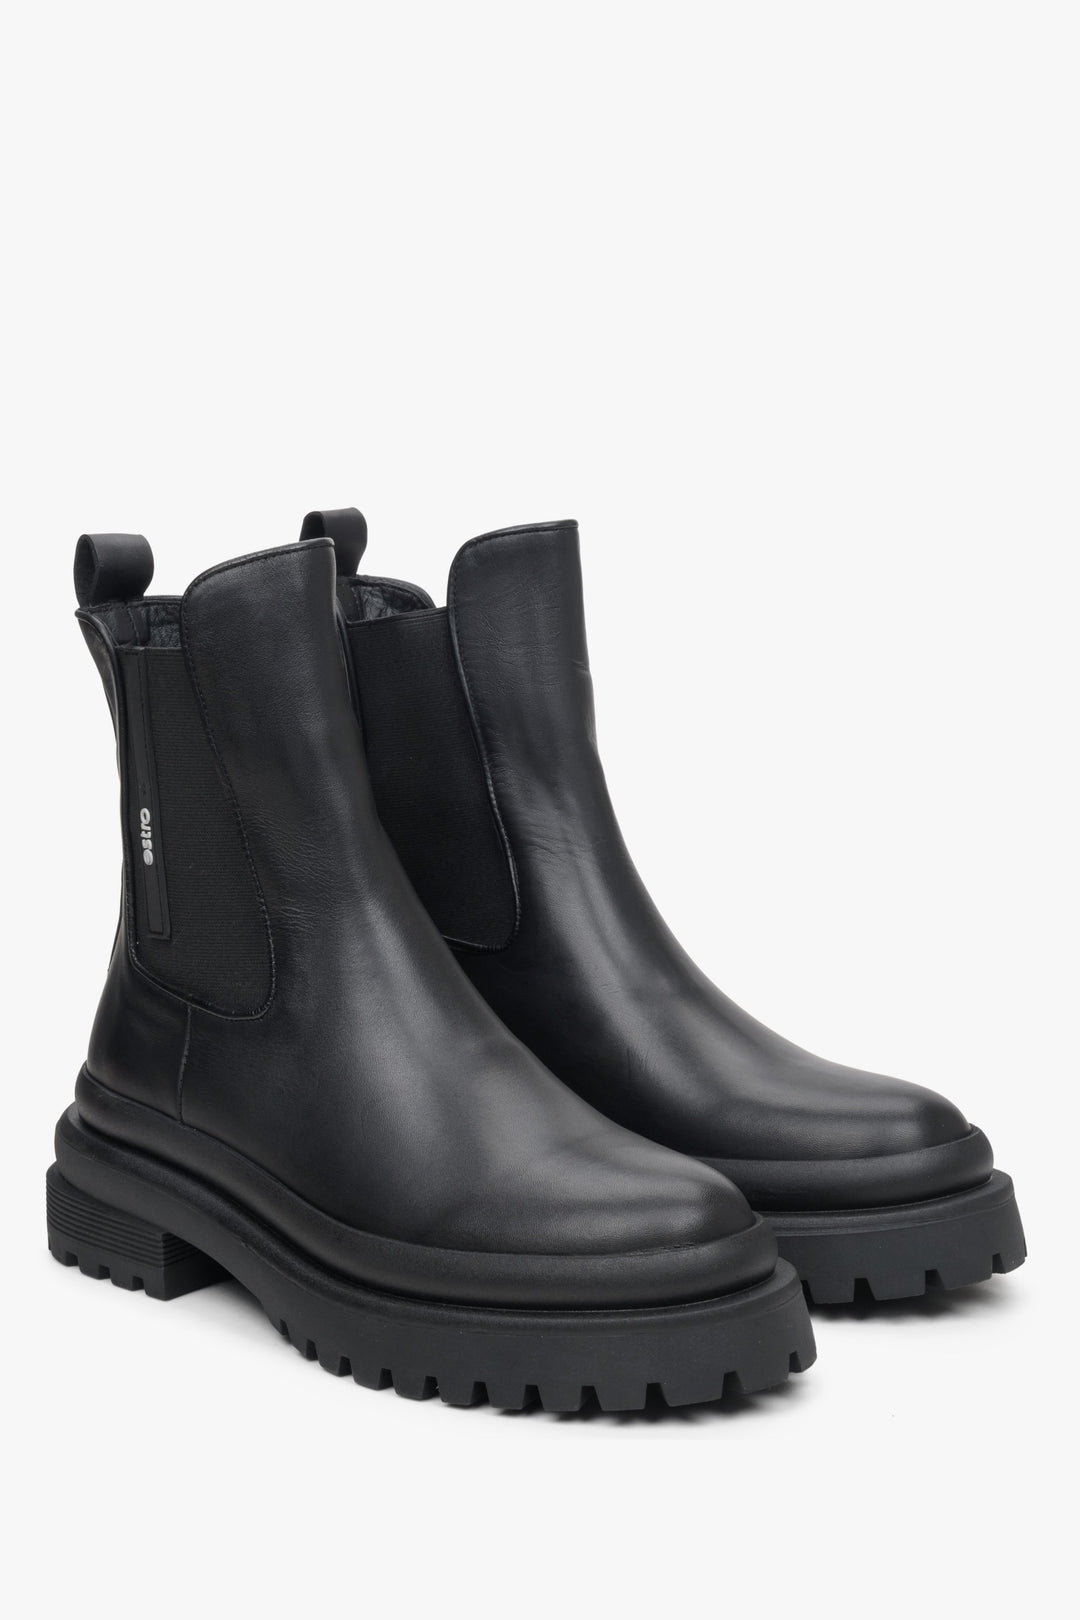 Women's black leather ankle boots by Estro - close-up on the toe cap.